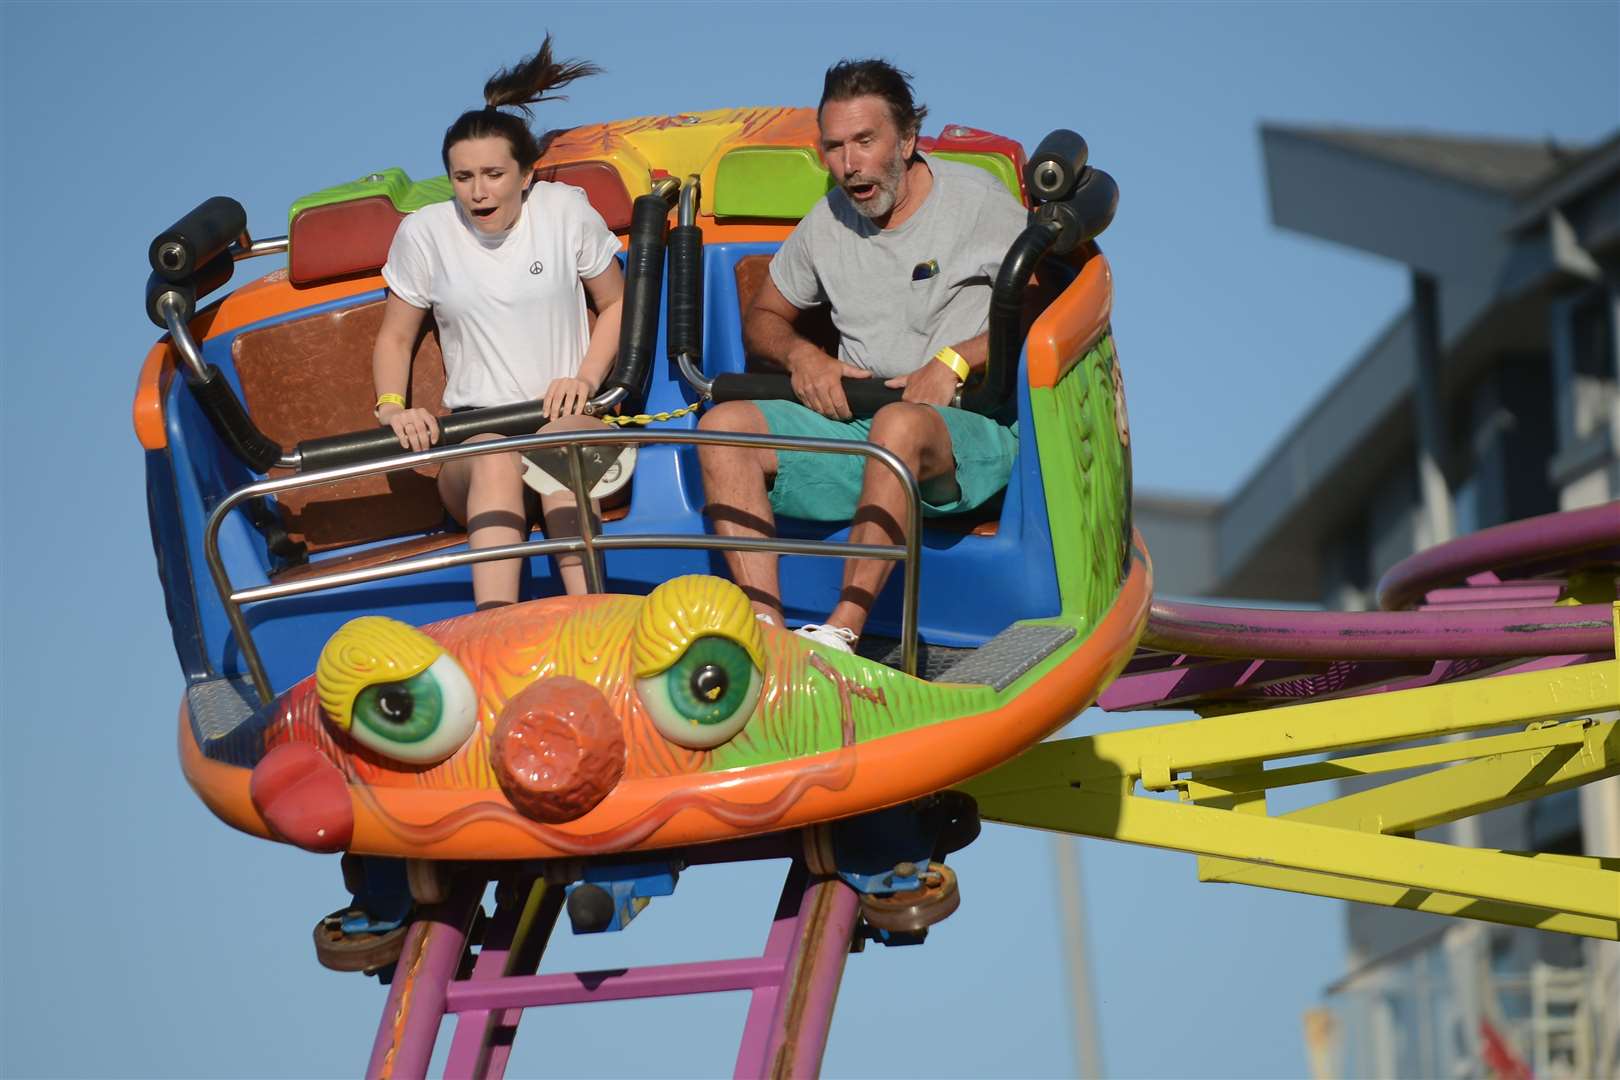 Enjoying the rides in 2017 at Dreamland. Picture: Gary Browne